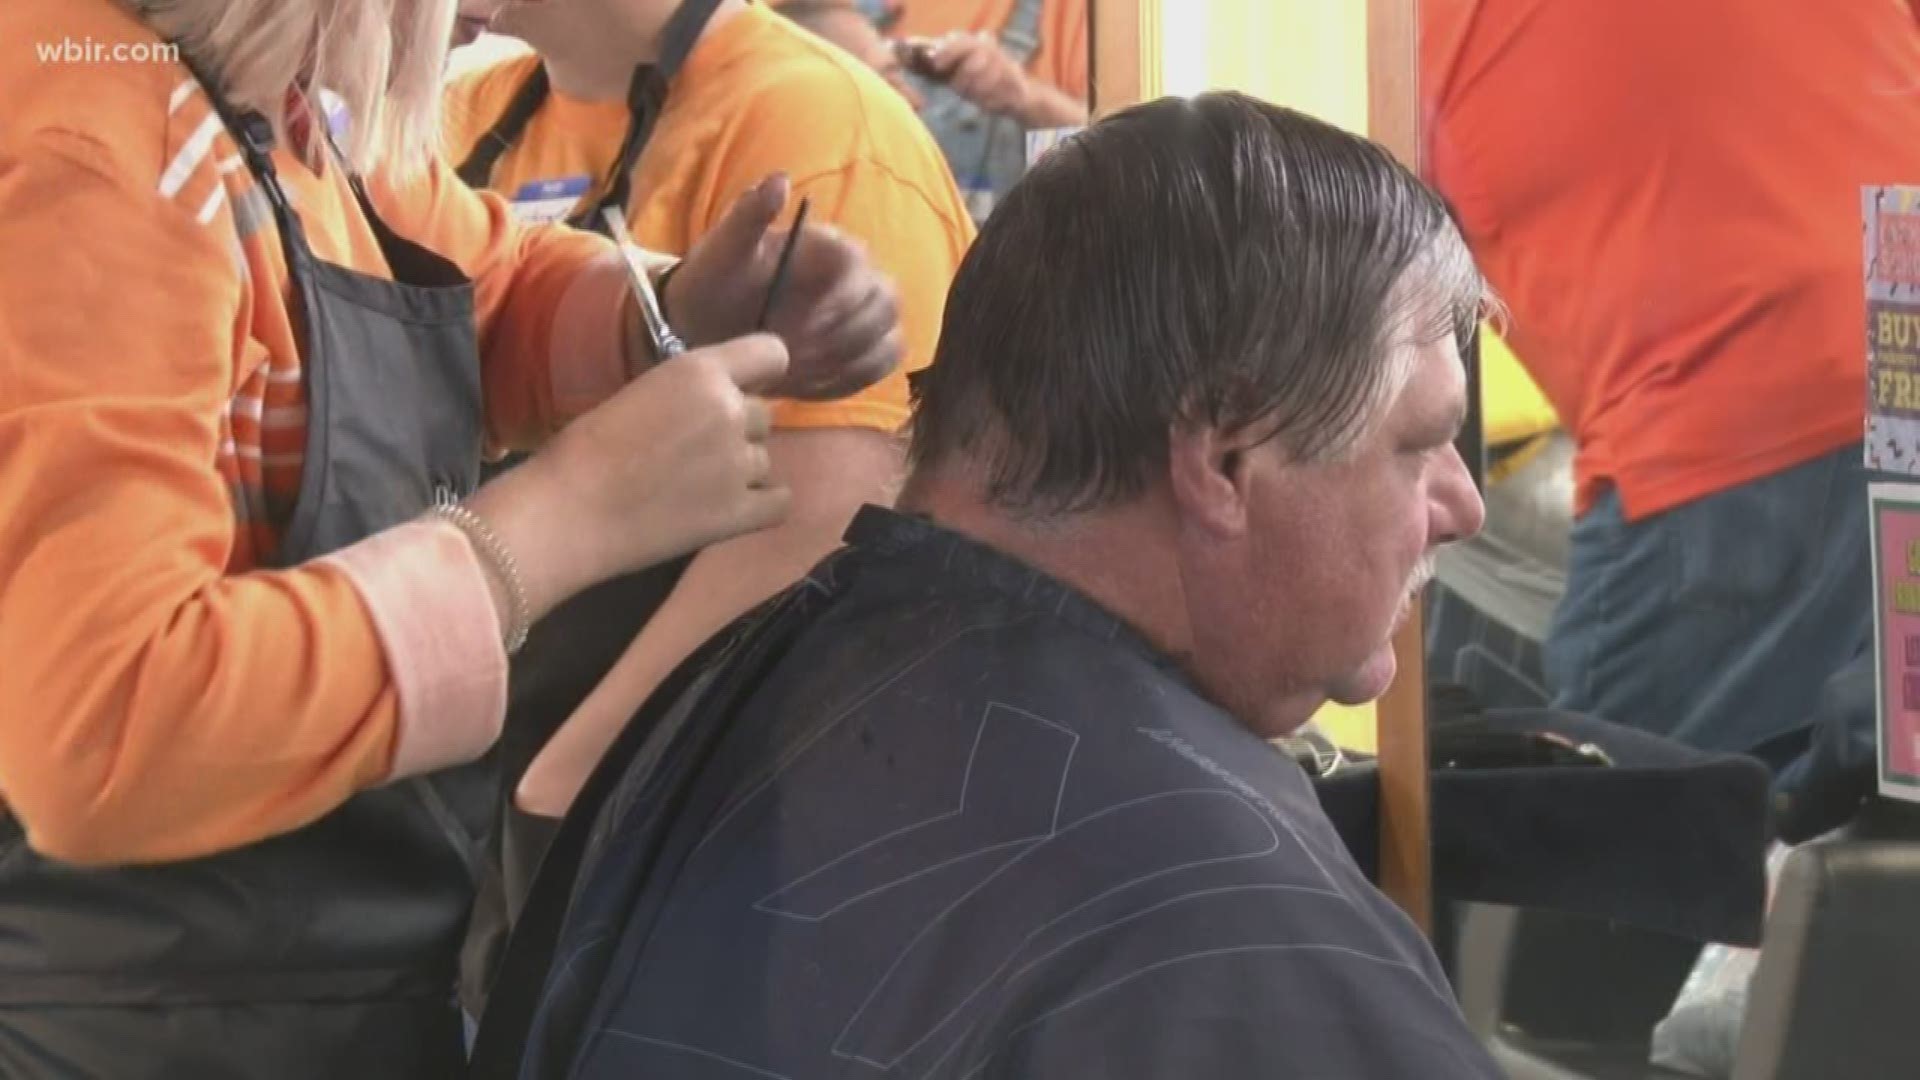 Organizers of care cuts said it's more than just a haircut. It's a little bit of hope and dignity.